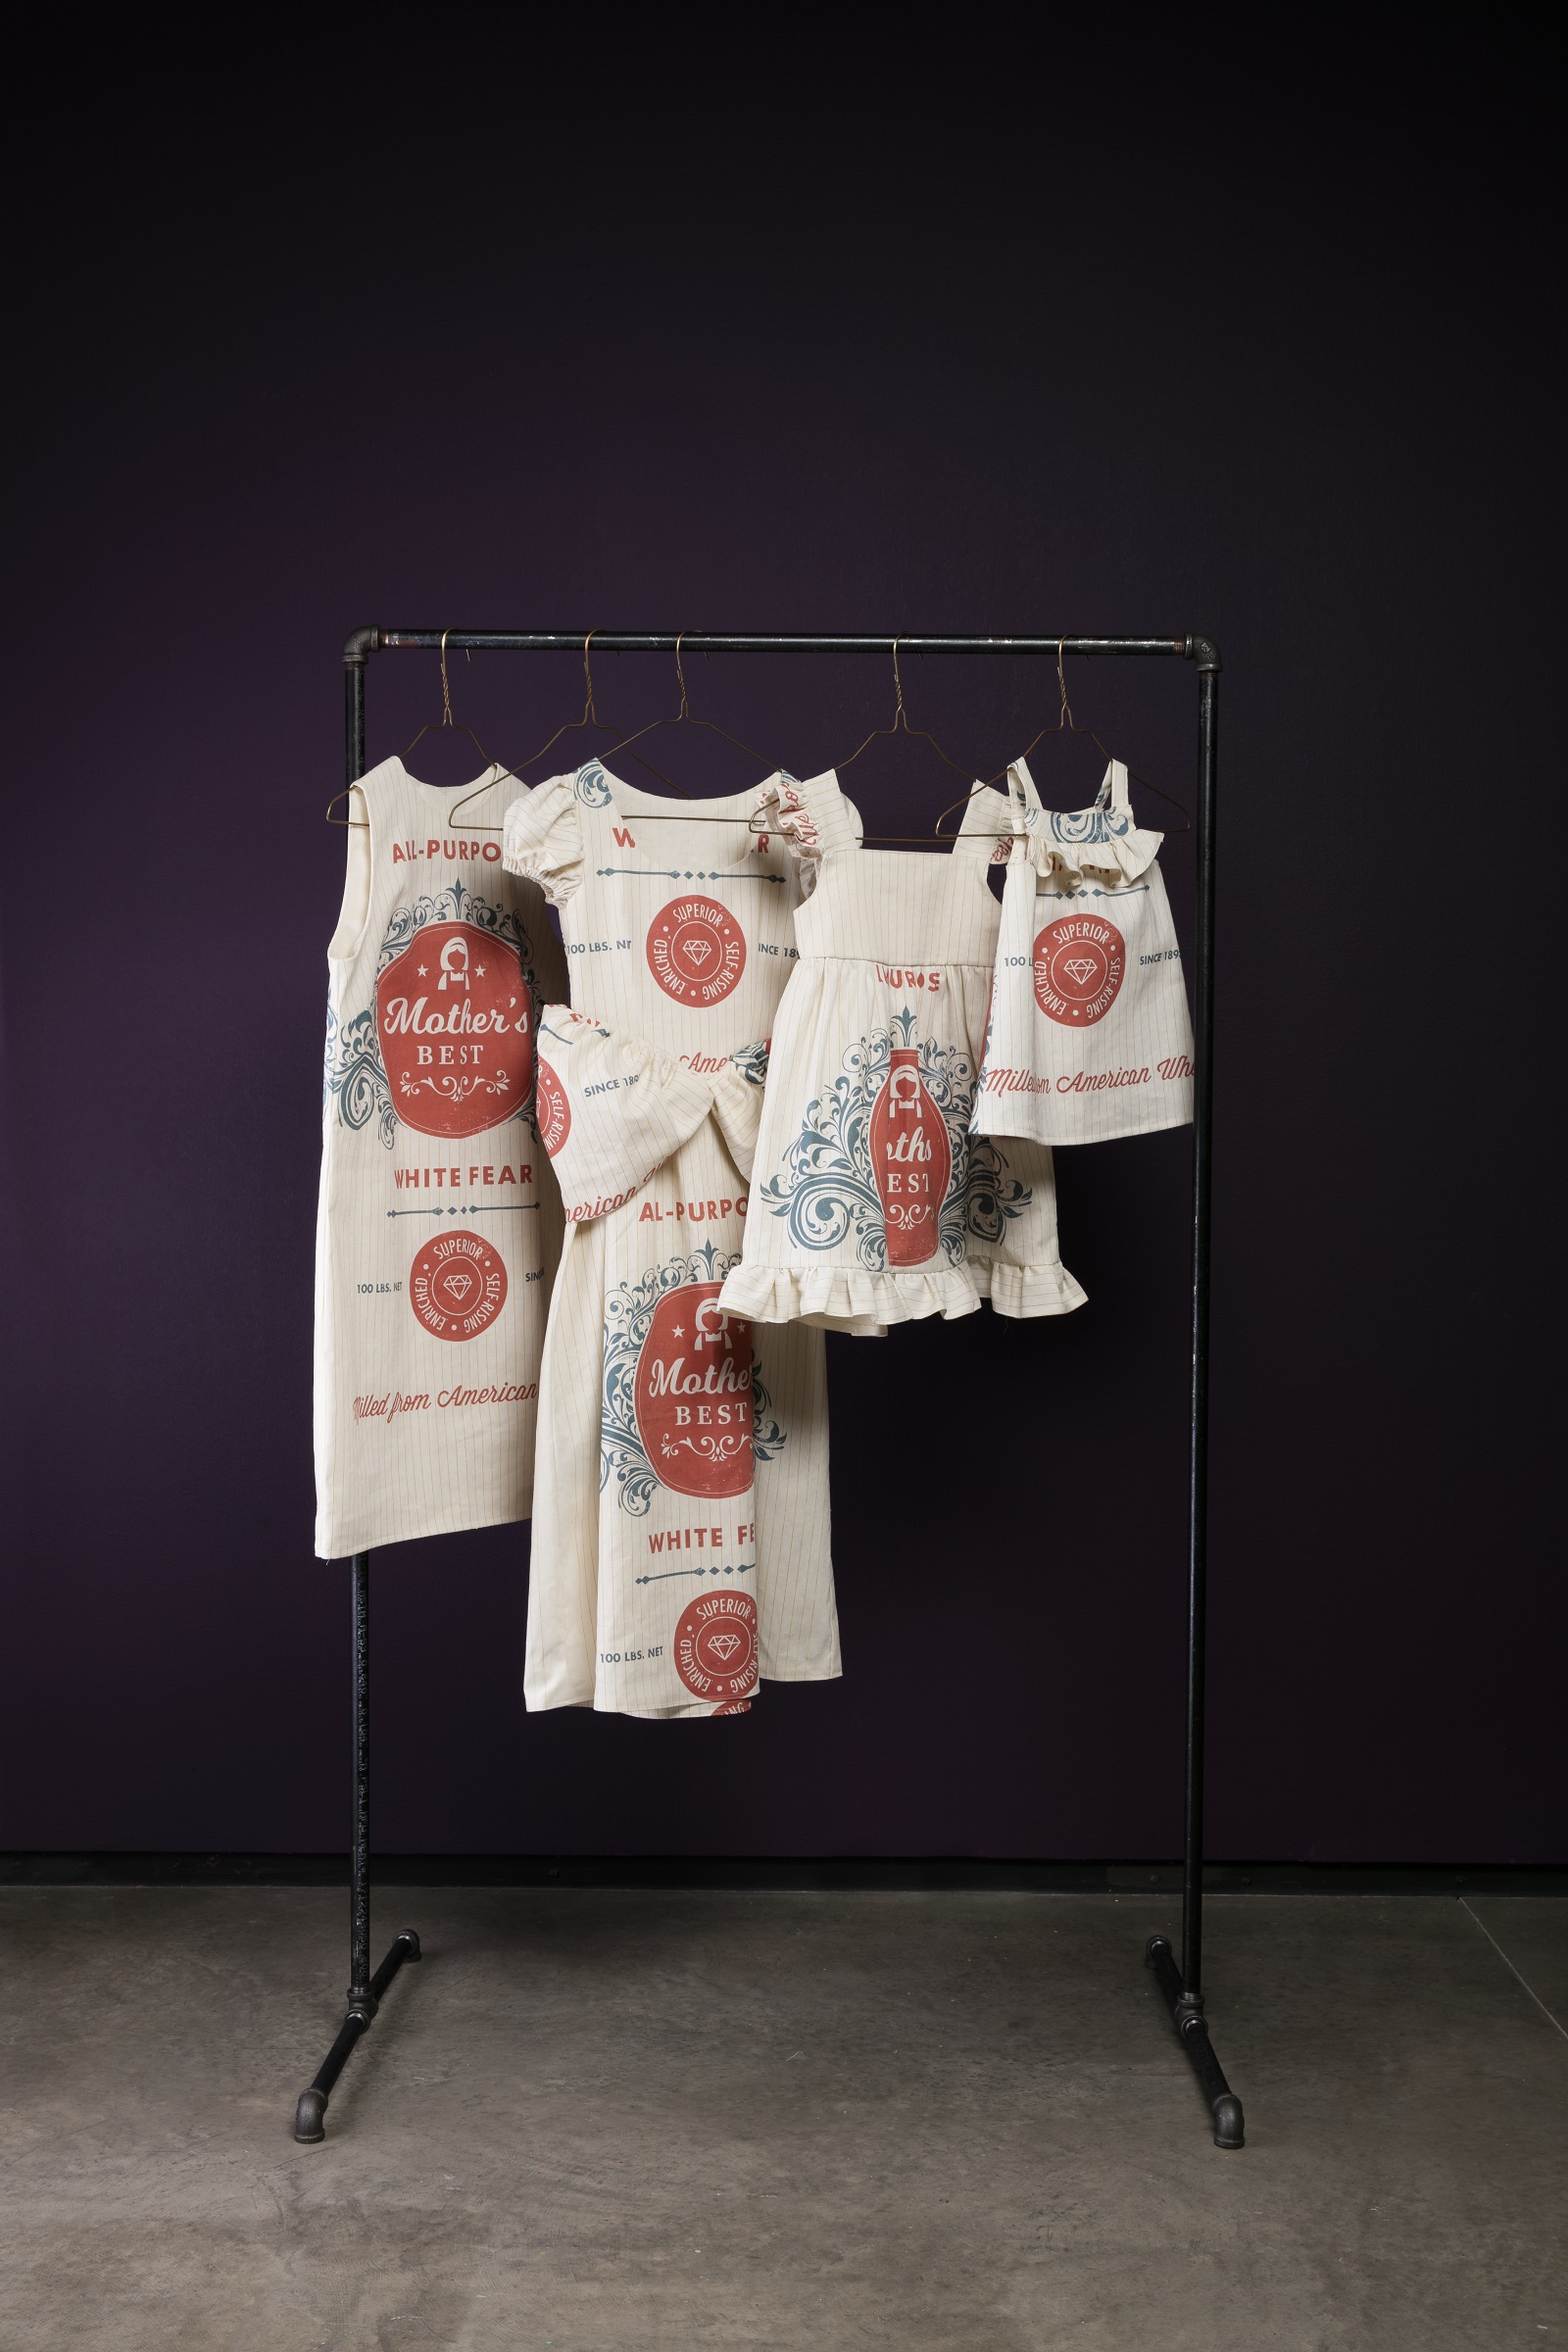 

											Jami Porter Lara</b>

											<em>
												Terms and Conditions</em> 

											<h4>
												August 13 - November 9, 2021											</h4>

		                																																													<i>She's a Good Person,</i>  
																																								2018, 
																																								digitally printed muslin, wire hangers, threaded steel pipe, 
																																								48 x 24 x 72 inches 
																								
		                				